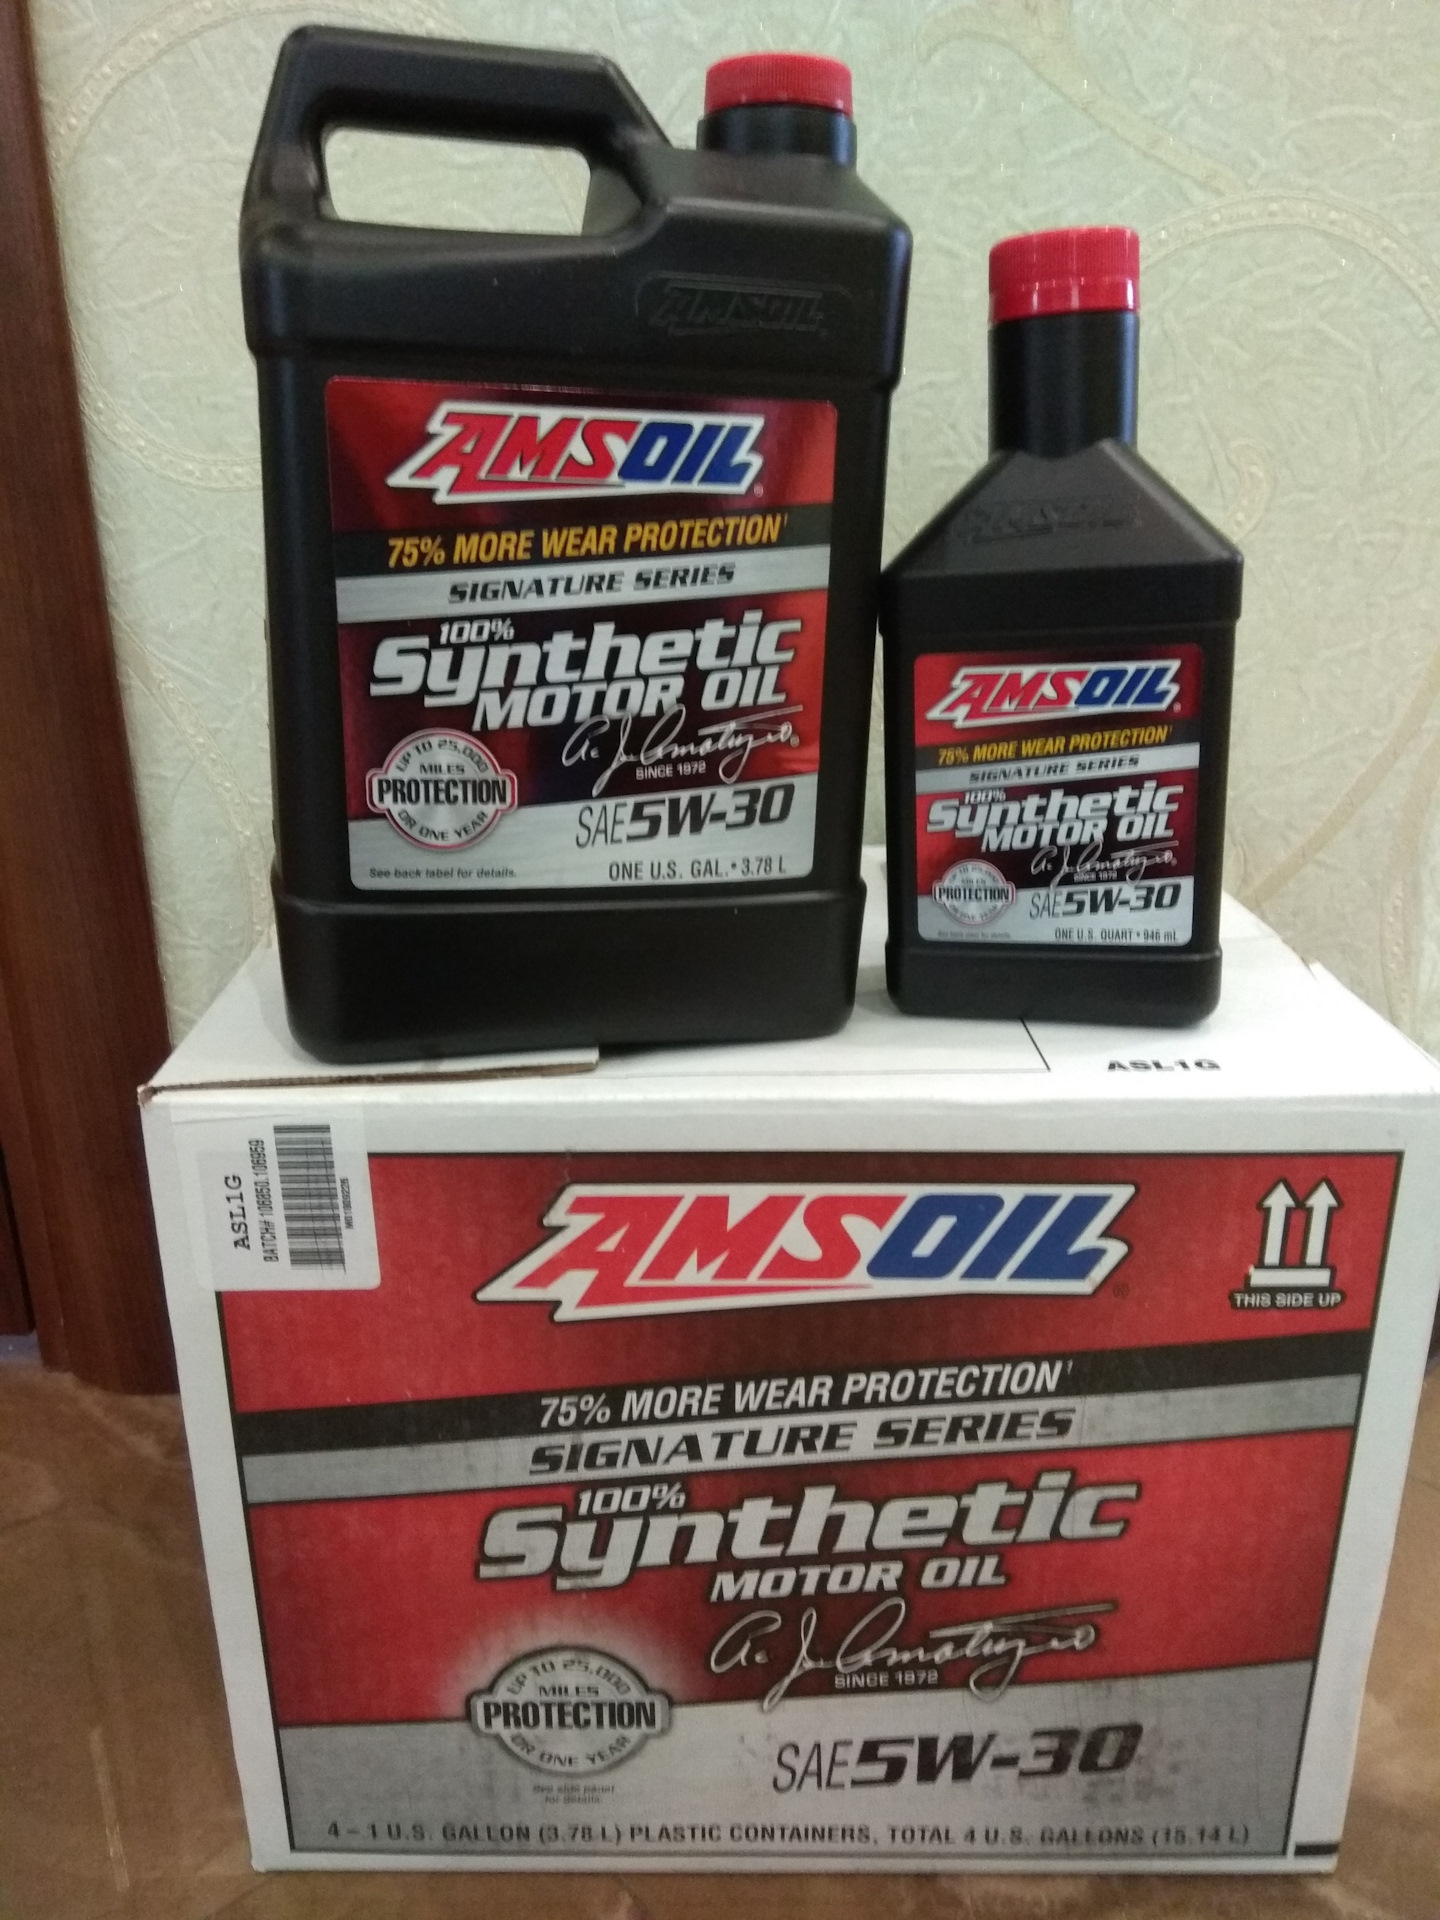 Signature series synthetic. AMSOIL Signature Series Synthetic 5w-30. AMSOIL 5w60 VAG. AMSOIL Signature Series 100% Synthetic 5w30 (asl1g),. AMSOIL Signature Series 5w-30 Synthetic Motor oi.